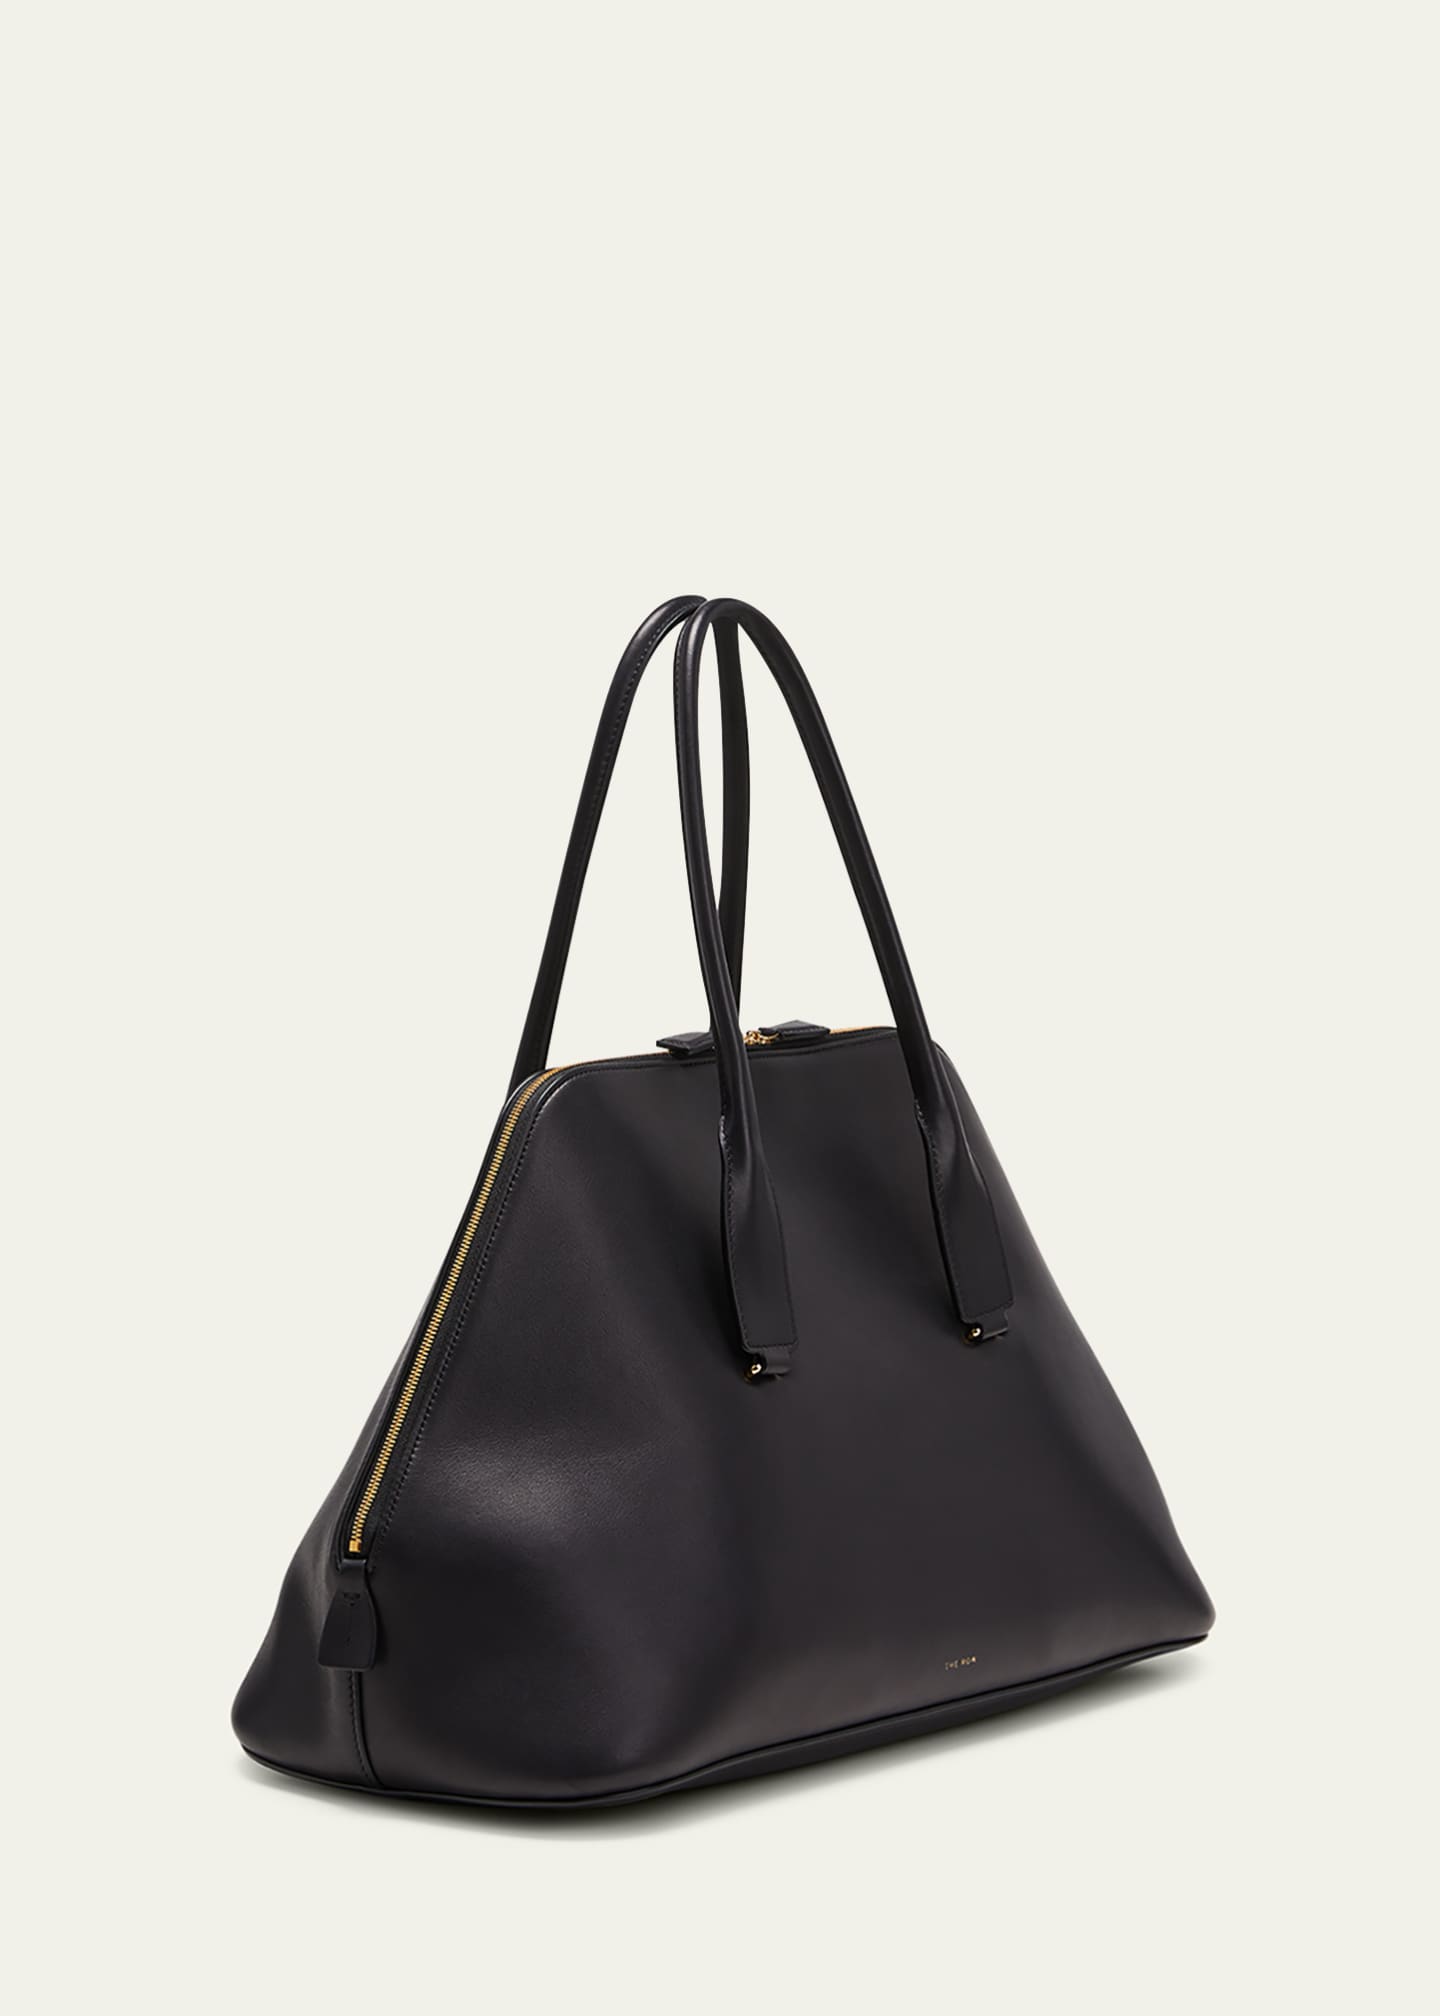 Get the best deals on Everyday Medium leather shoulder bag The Row